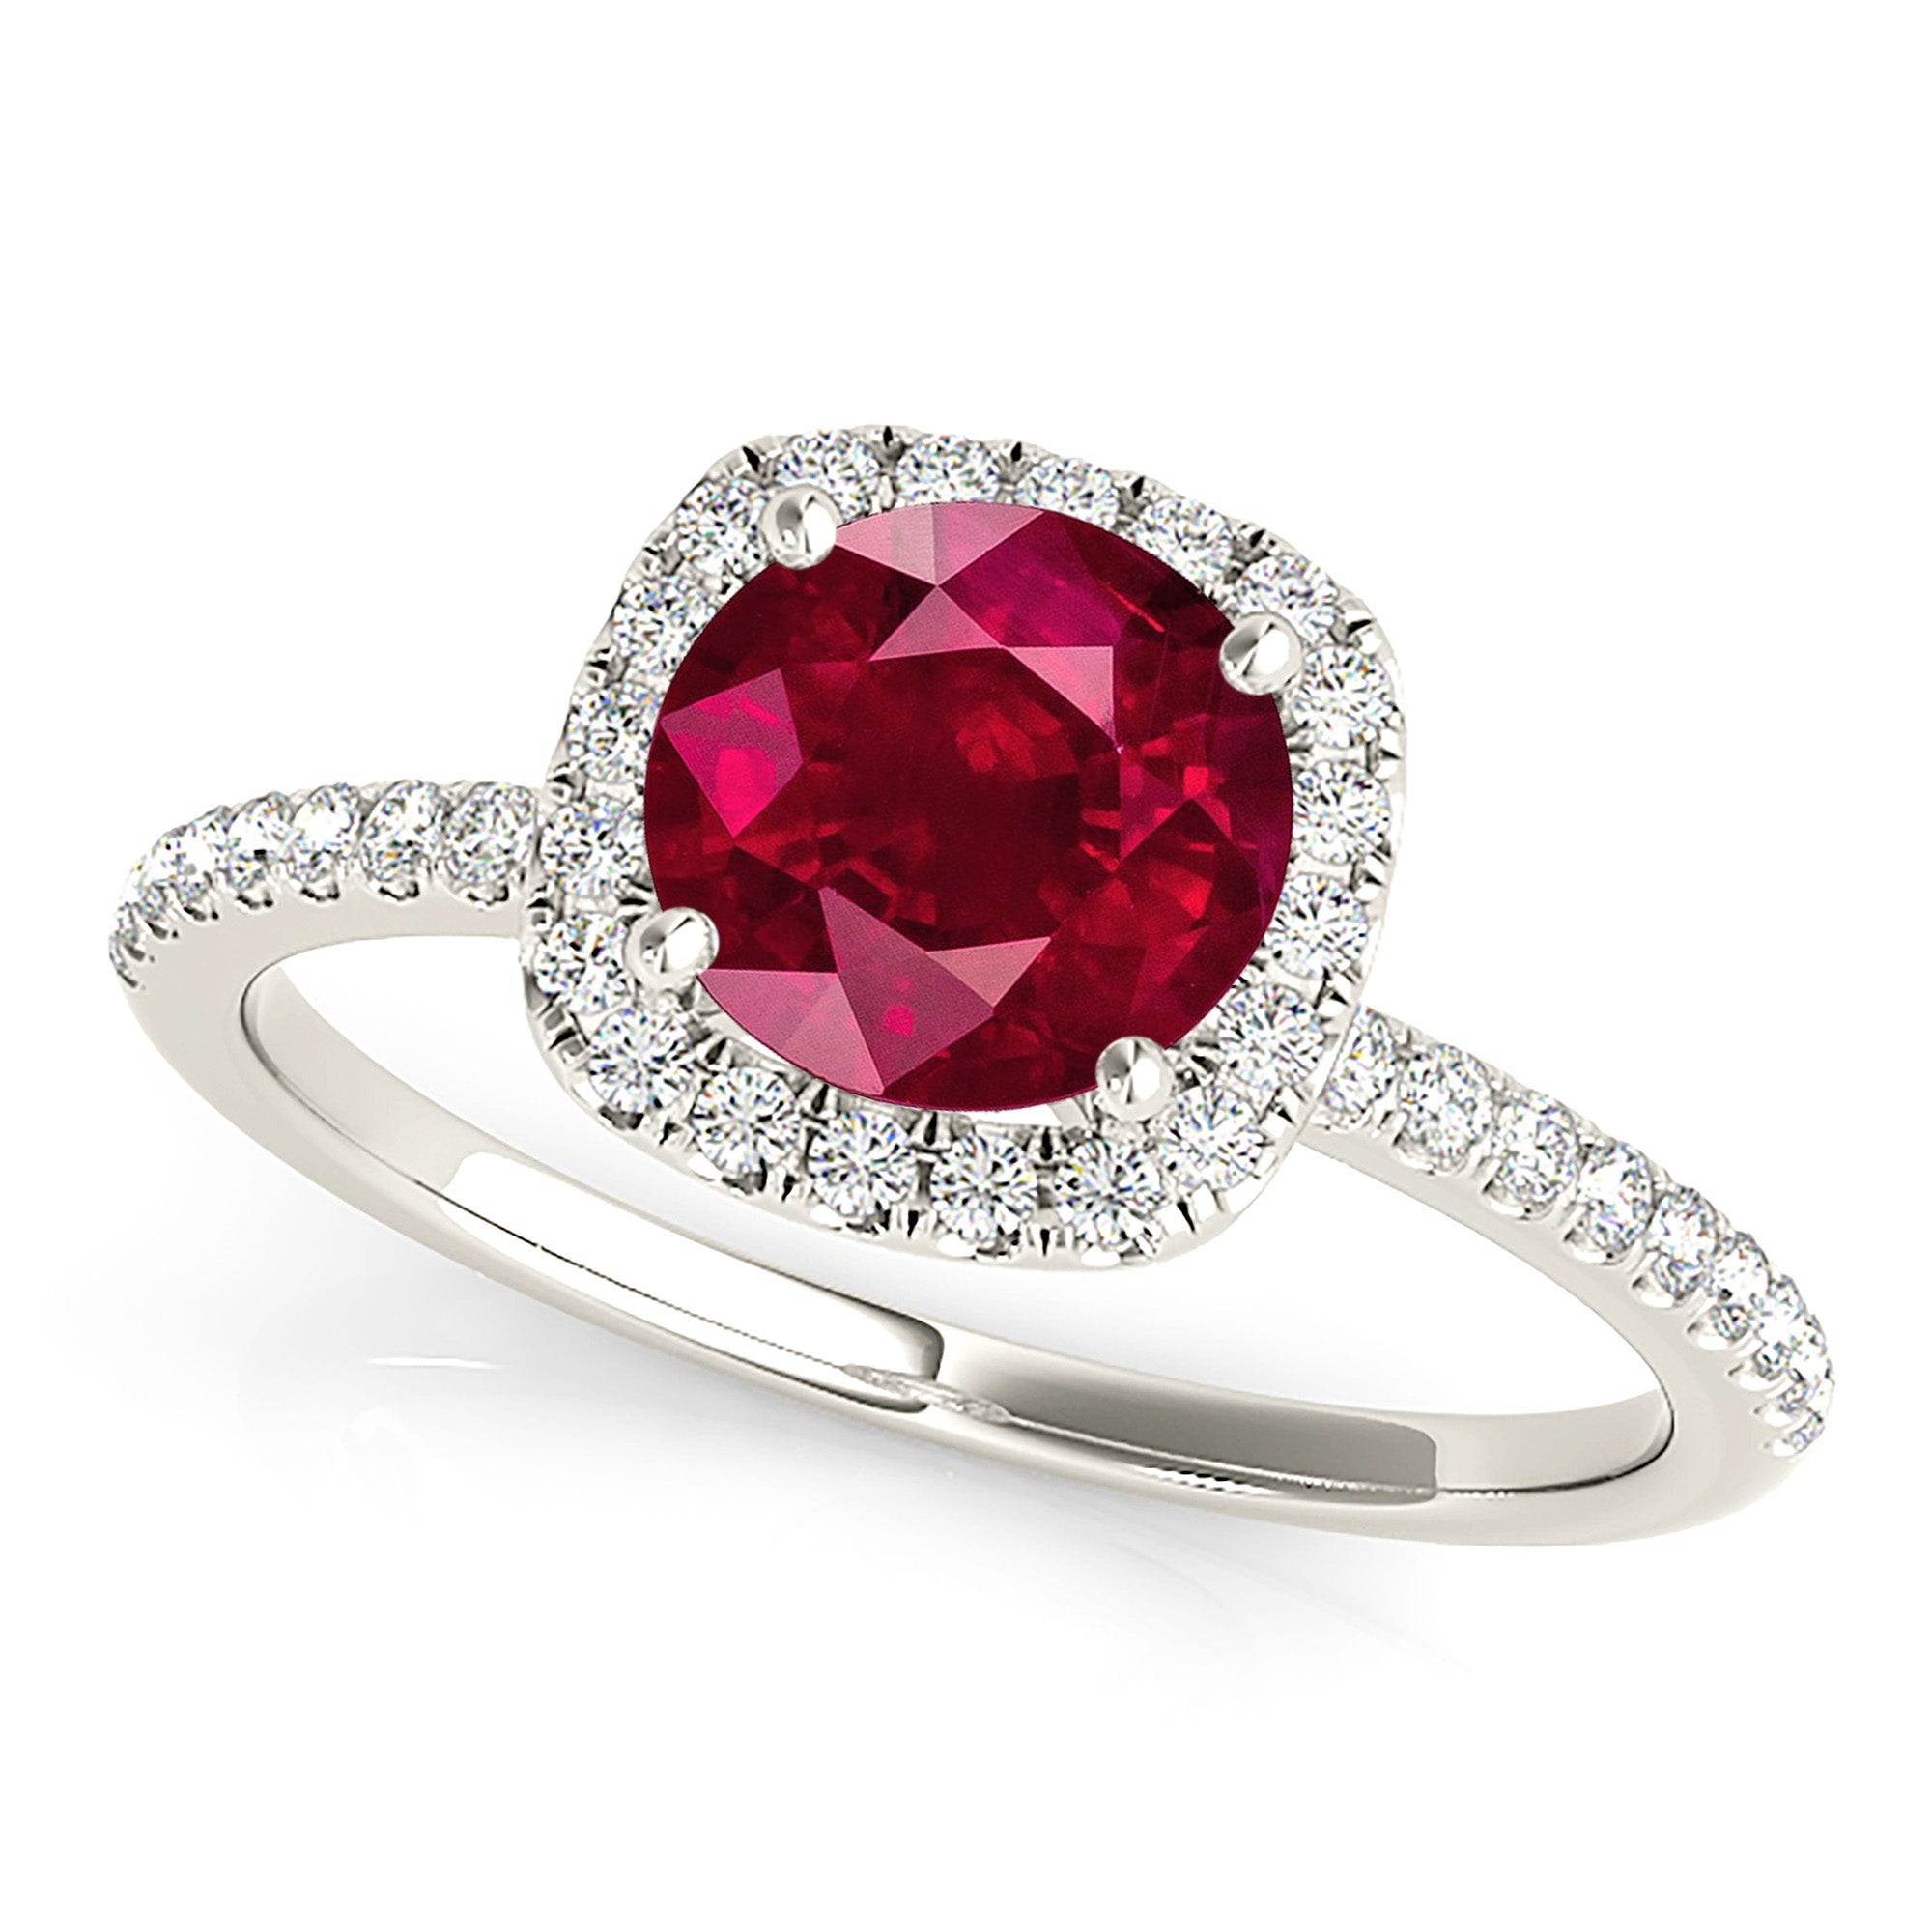 1.35 ct. Genuine Round Ruby Ring With 0.20 ctw. Diamond Cushion Halo, Delicate Diamond Band | Round Ruby Halo Ring | Natural Ruby Ring-in 14K/18K White, Yellow, Rose Gold and Platinum - Christmas Jewelry Gift -VIRABYANI